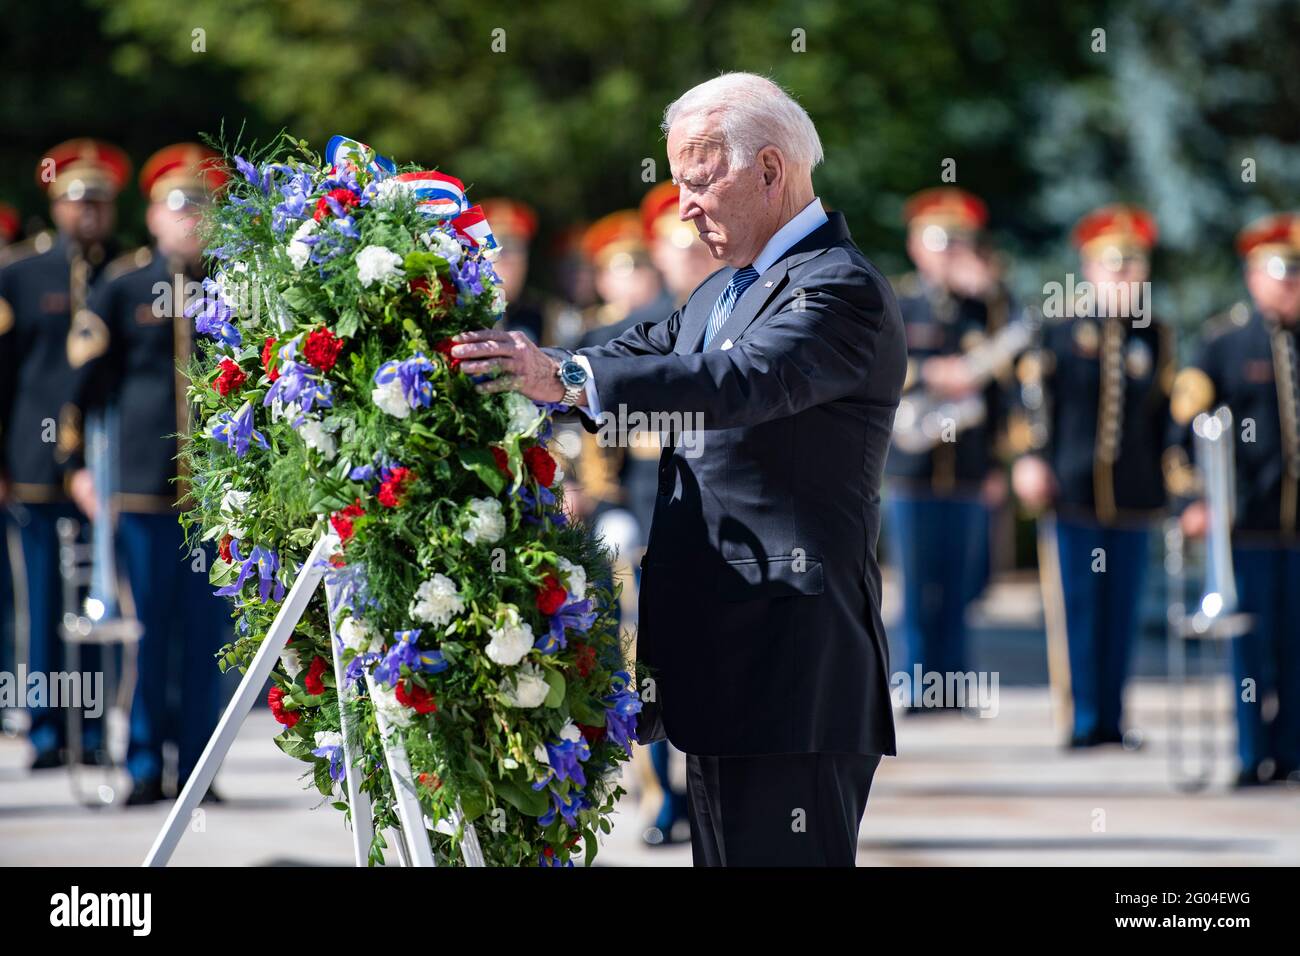 Arlington, United States Of America. 31st May, 2021. U.S President Joe Biden during the Presidental Armed Forces Full Honors Wreath-Laying Ceremony at the Tomb of the Unknown Soldier Arlington National Cemetery May 31, 2021 Arlington, Virginia. Credit: Planetpix/Alamy Live News Stock Photo